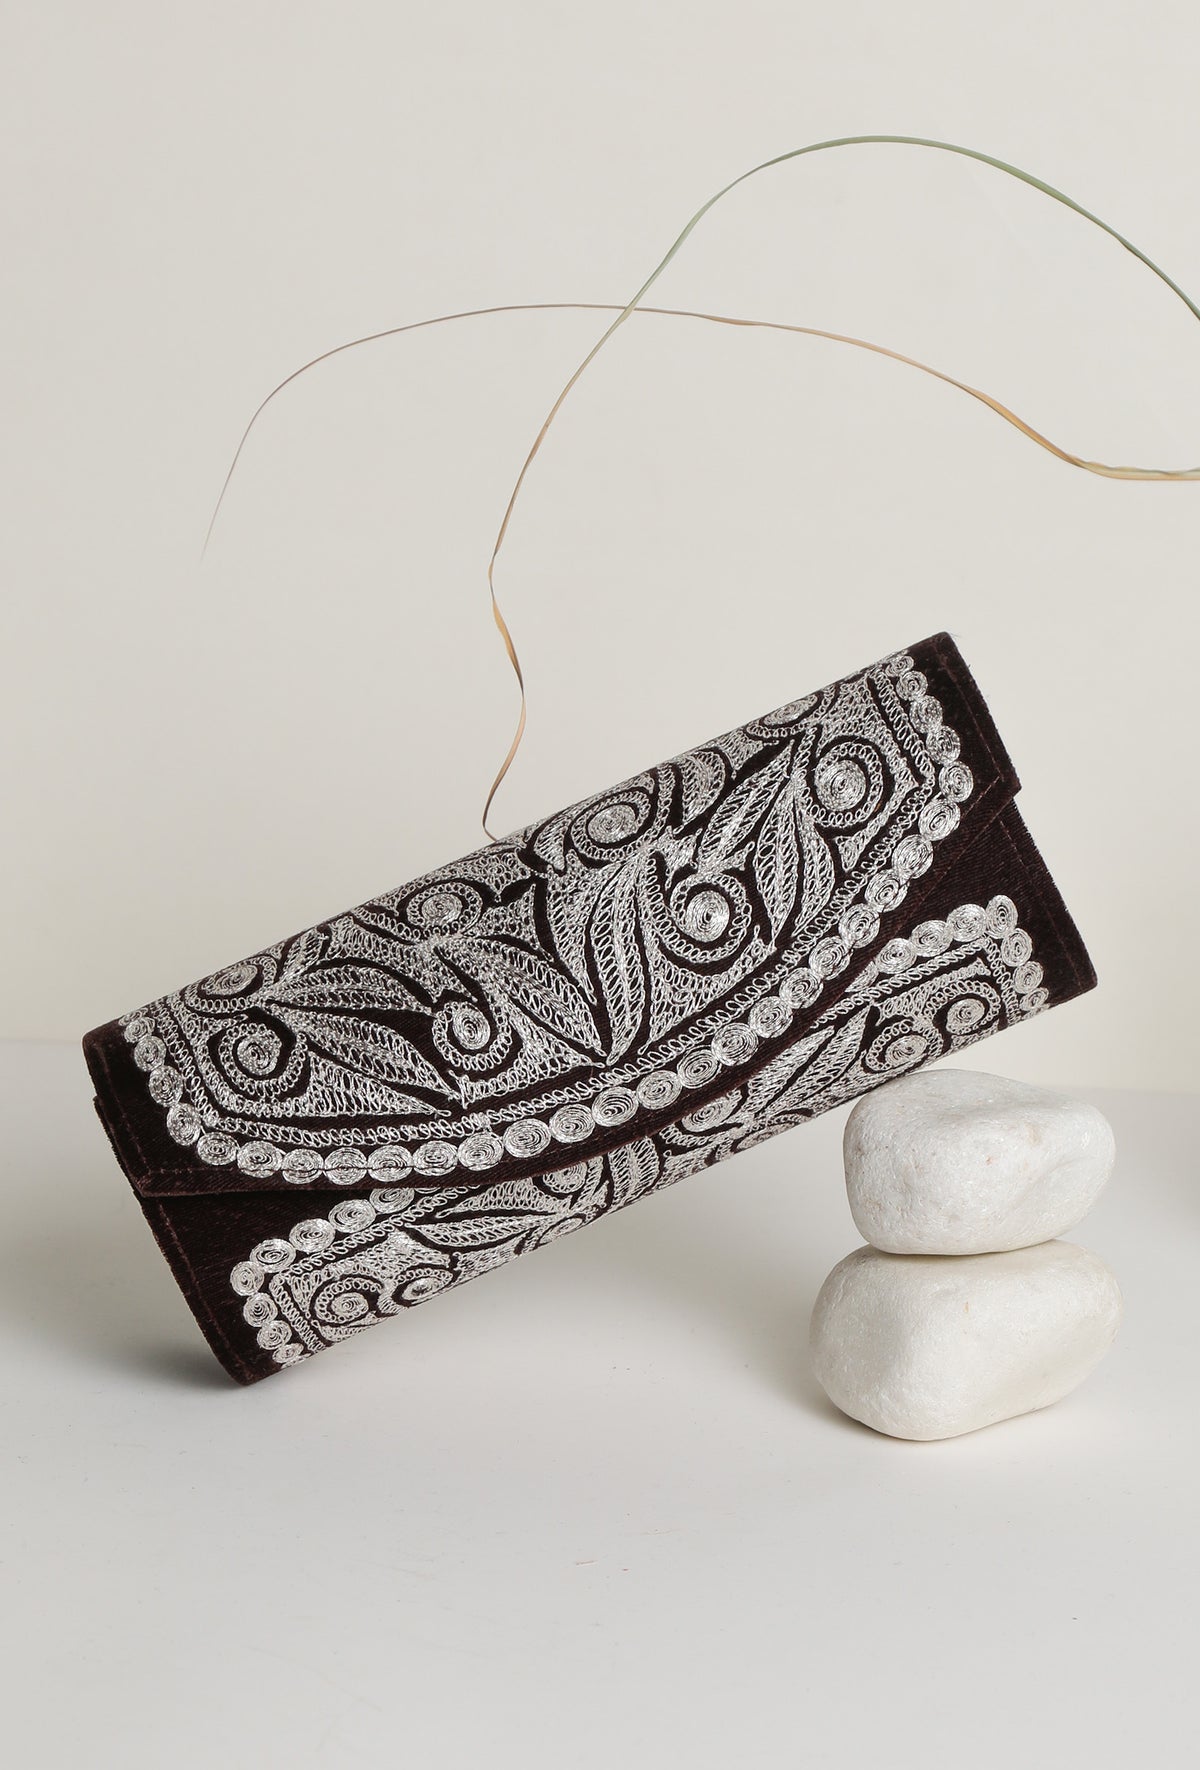 Brown Velvet Silver Embroidered Clutch